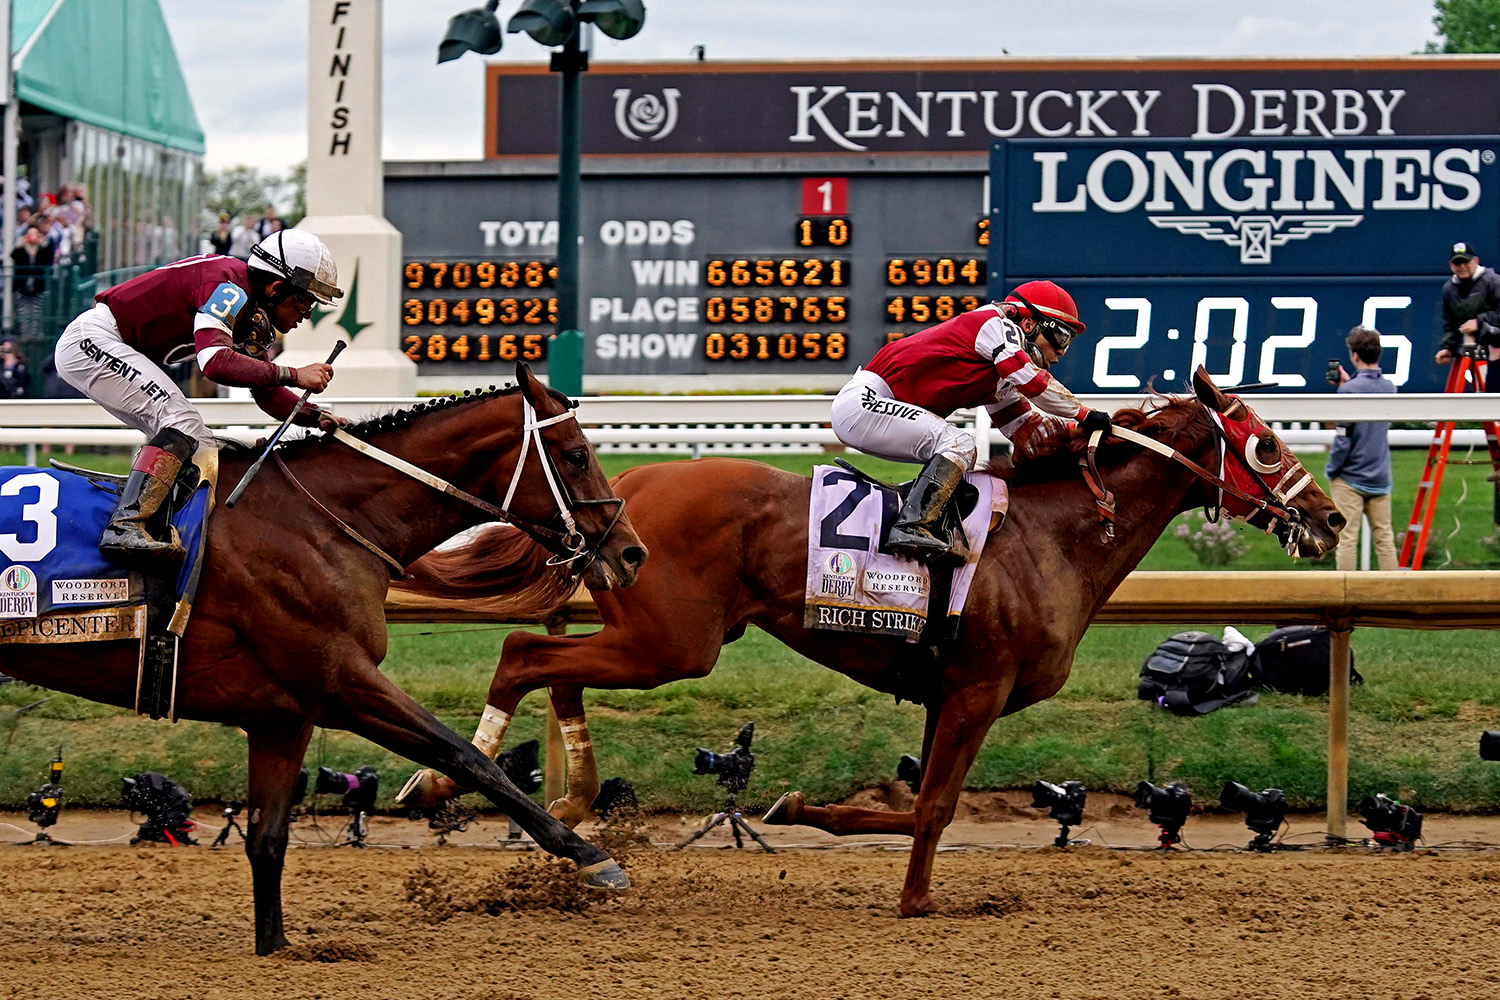 Behind The Scenes Of Kentucky Derby 2022 With Longines What It's Like